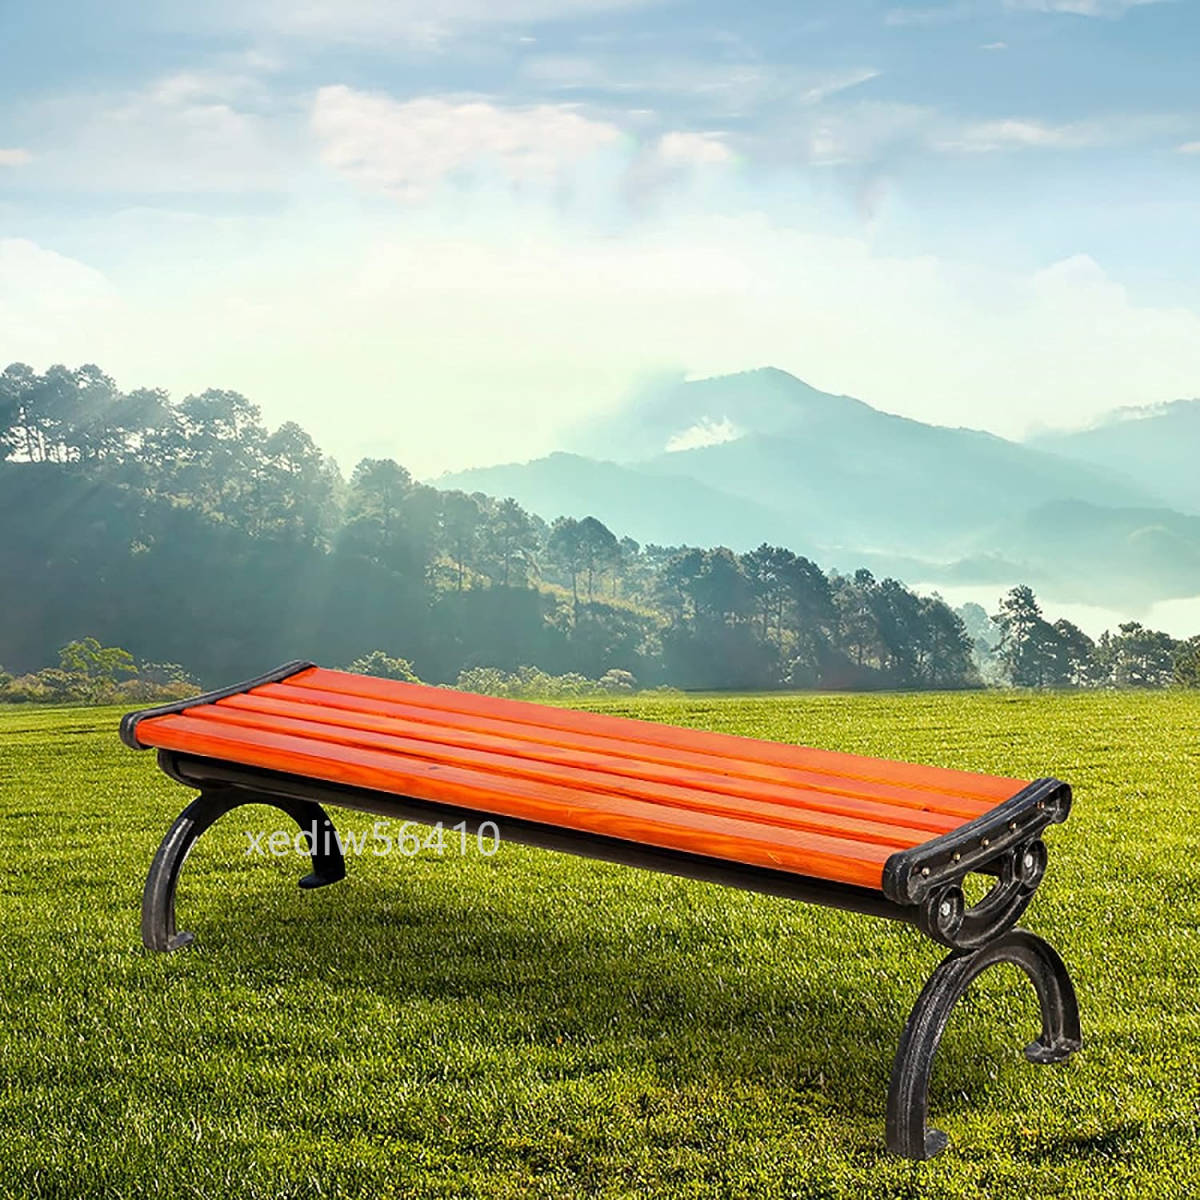  garden bench wooden outdoors bench width 120× depth 40× height 38cm withstand load : approximately 300kg